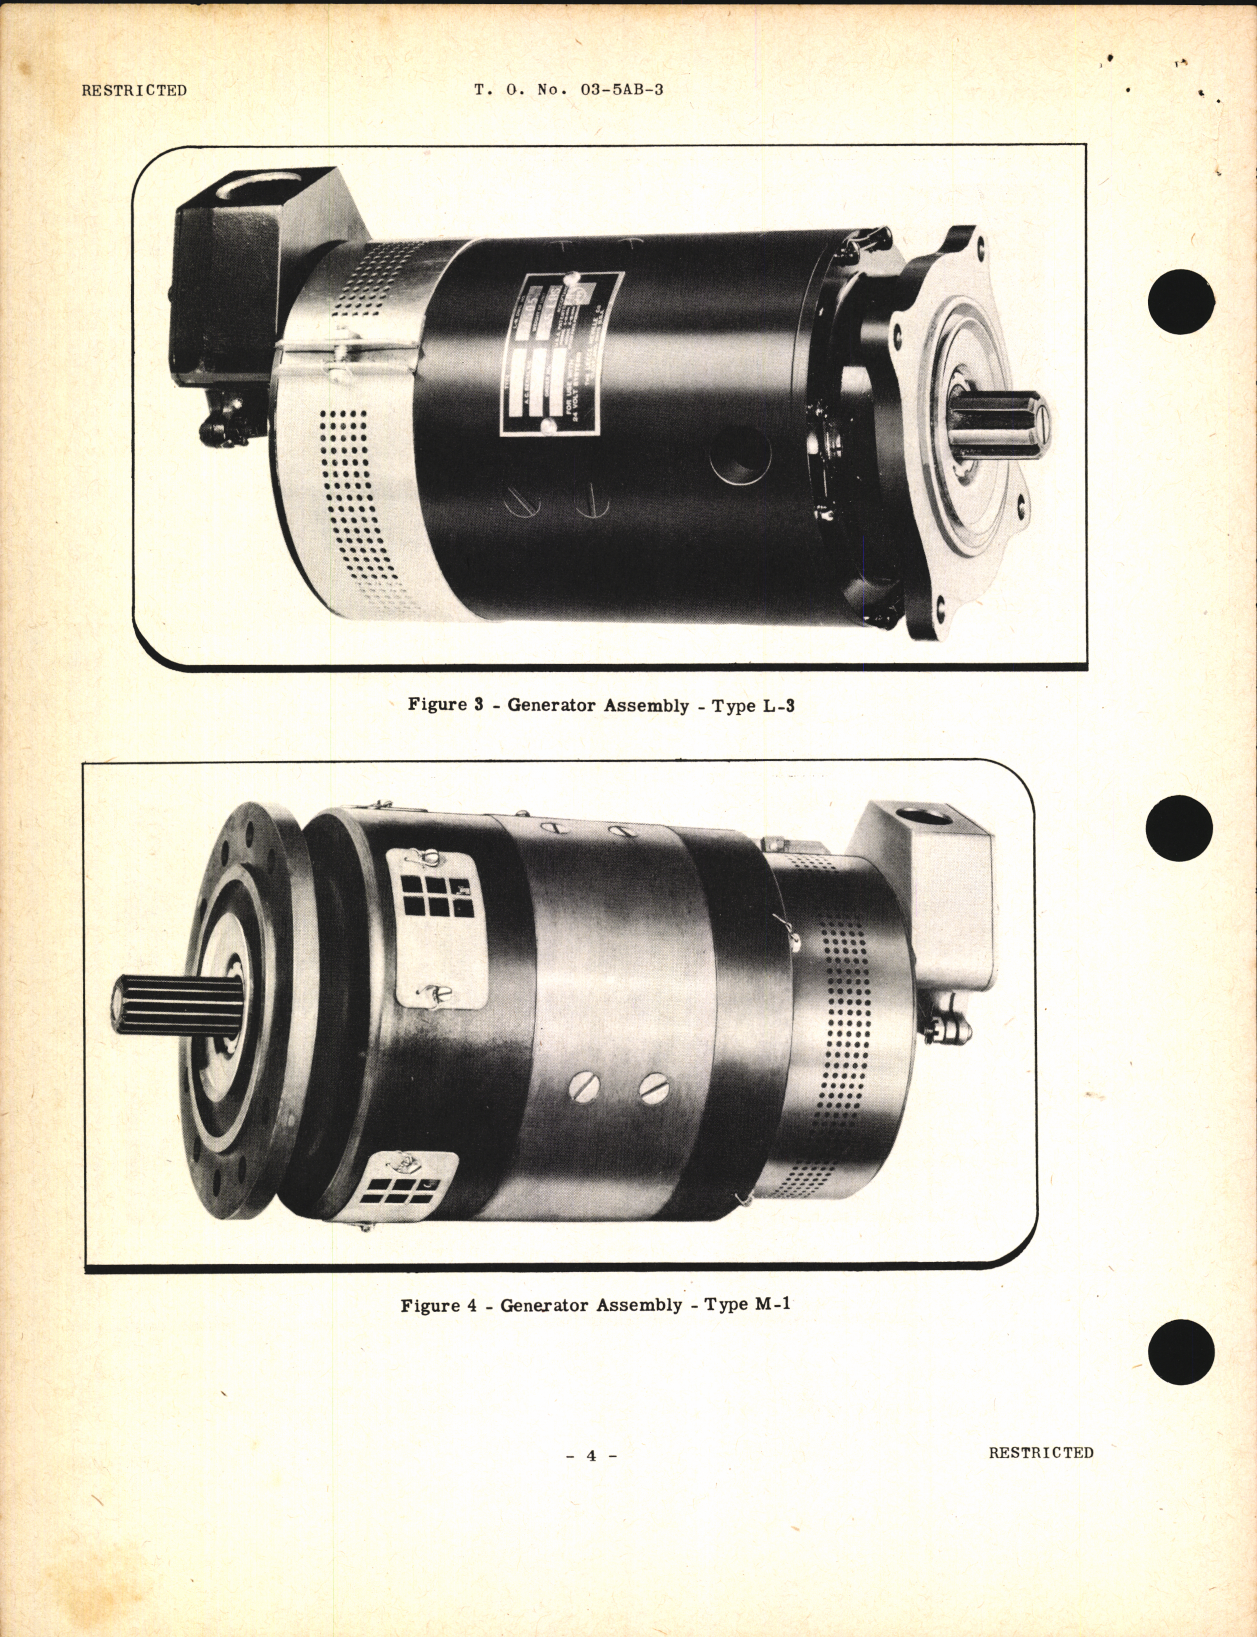 Sample page 6 from AirCorps Library document: Handbook of Instructions with Parts Catalog for Aircraft Generators (24 Volt) Types L-1, L-2, L-3, and M-1